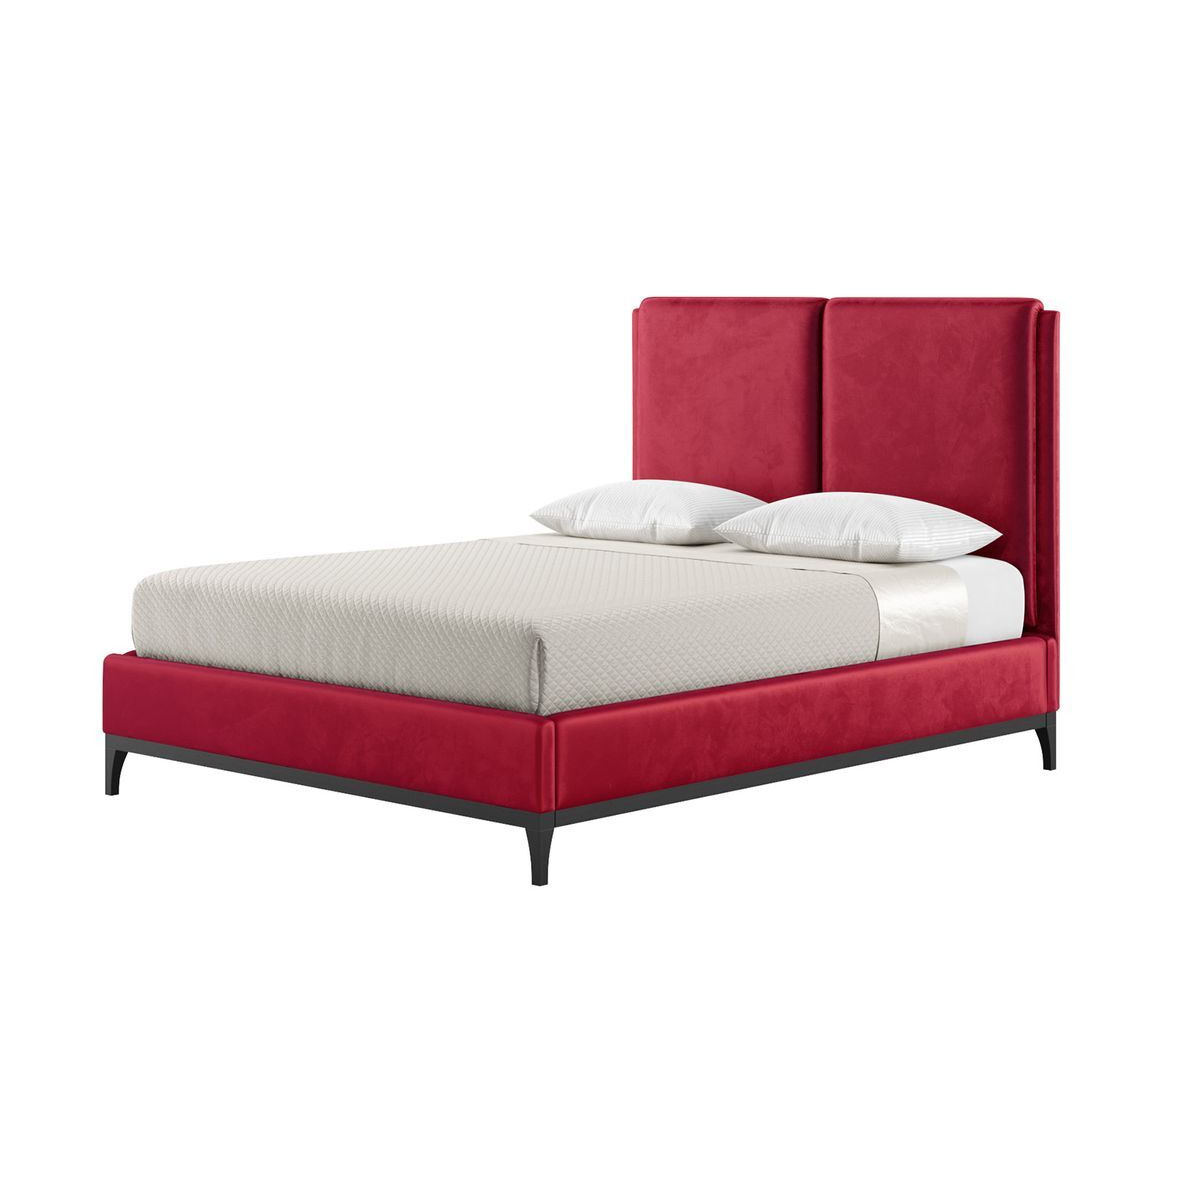 Emily 5ft King Size Bed Frame with contemporary twin panel headboard, dark red, Leg colour: black - image 1